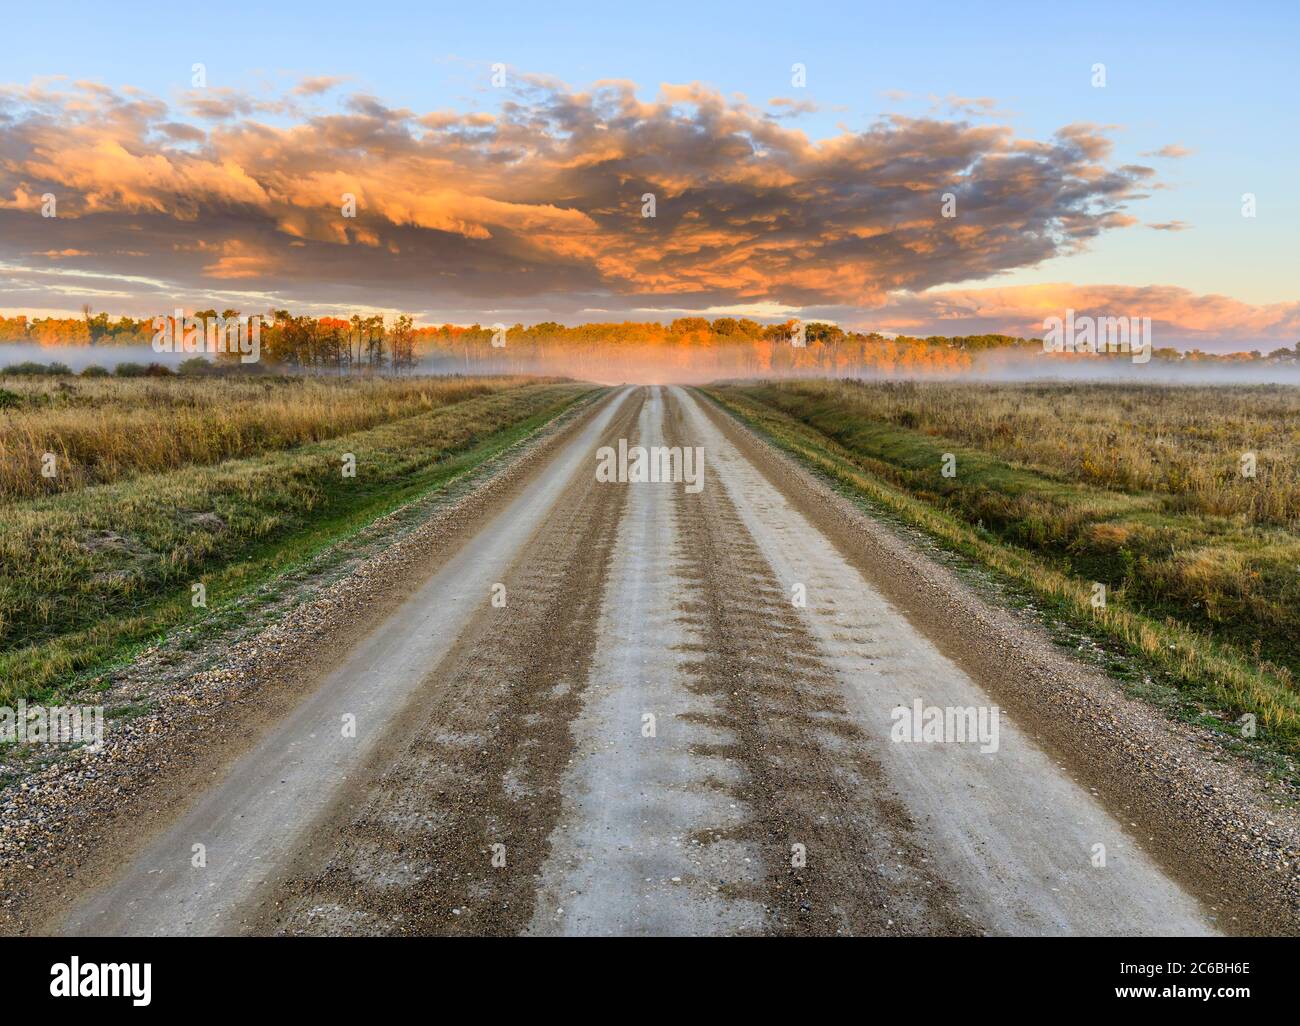 A country dirt road at sunrise, Western Manitoba, Canada. Stock Photo